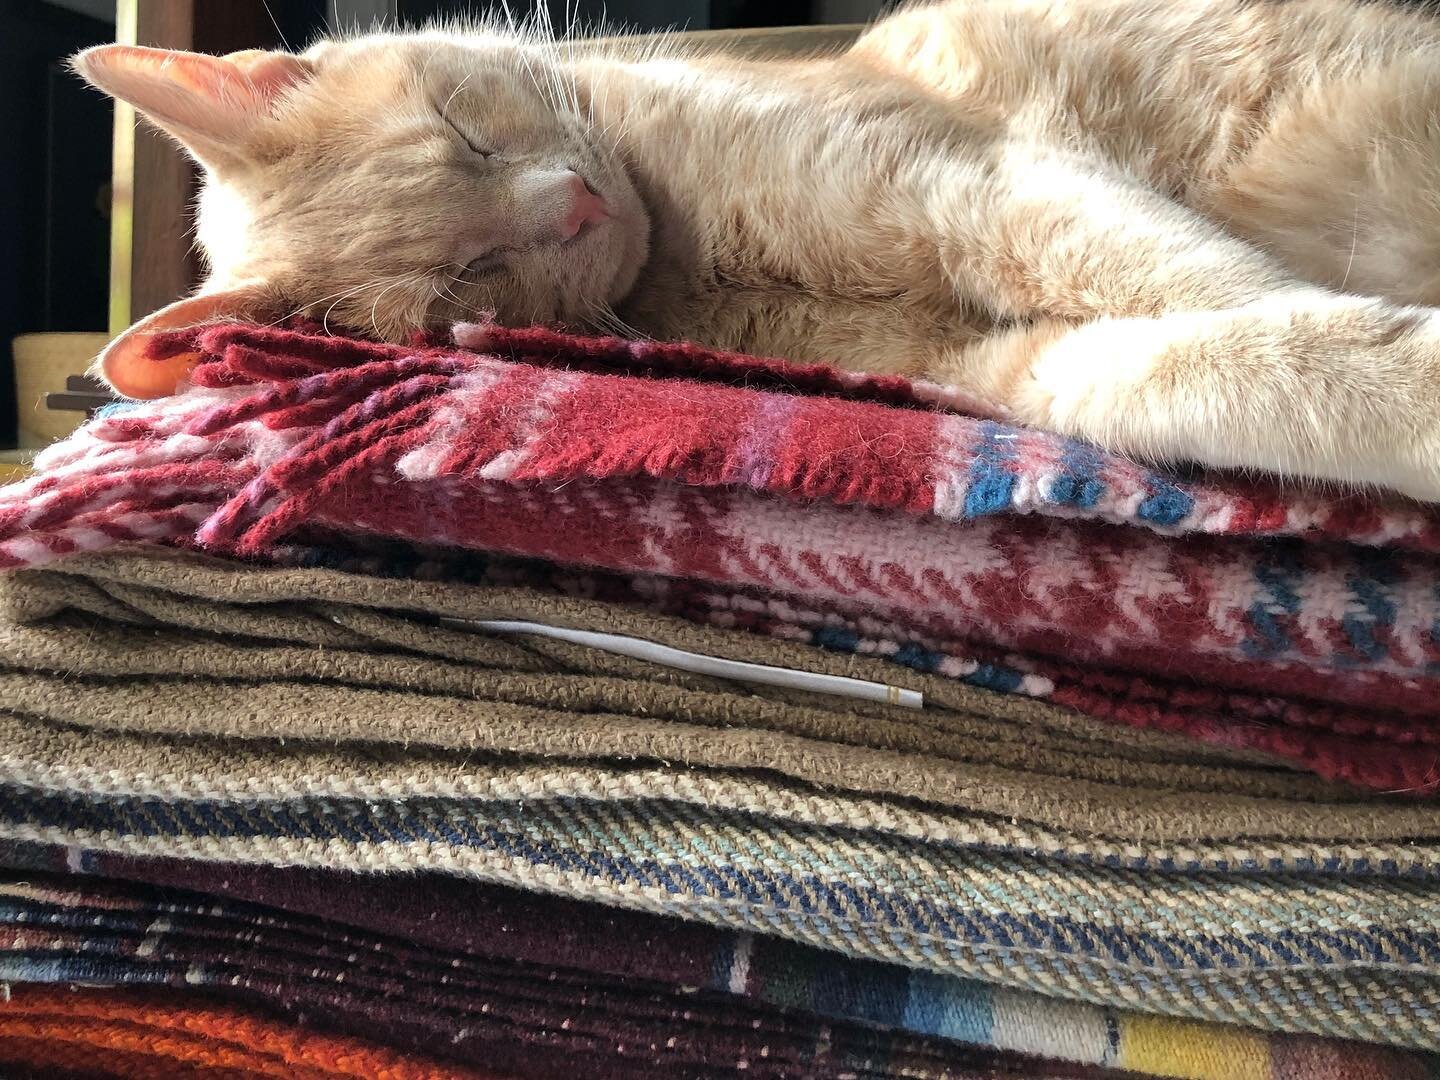 Sunday vibe: a stack of favorite blankets, air conditioning, a movie, and a nap. August 2020. Covid and 2 hurricanes. #blakewoodsdesign #cricketwood #catsofinstagram #sundaynap #nap #loveislove #itshotoutside🔥 #hurricanepreparedness #summerofcovid #